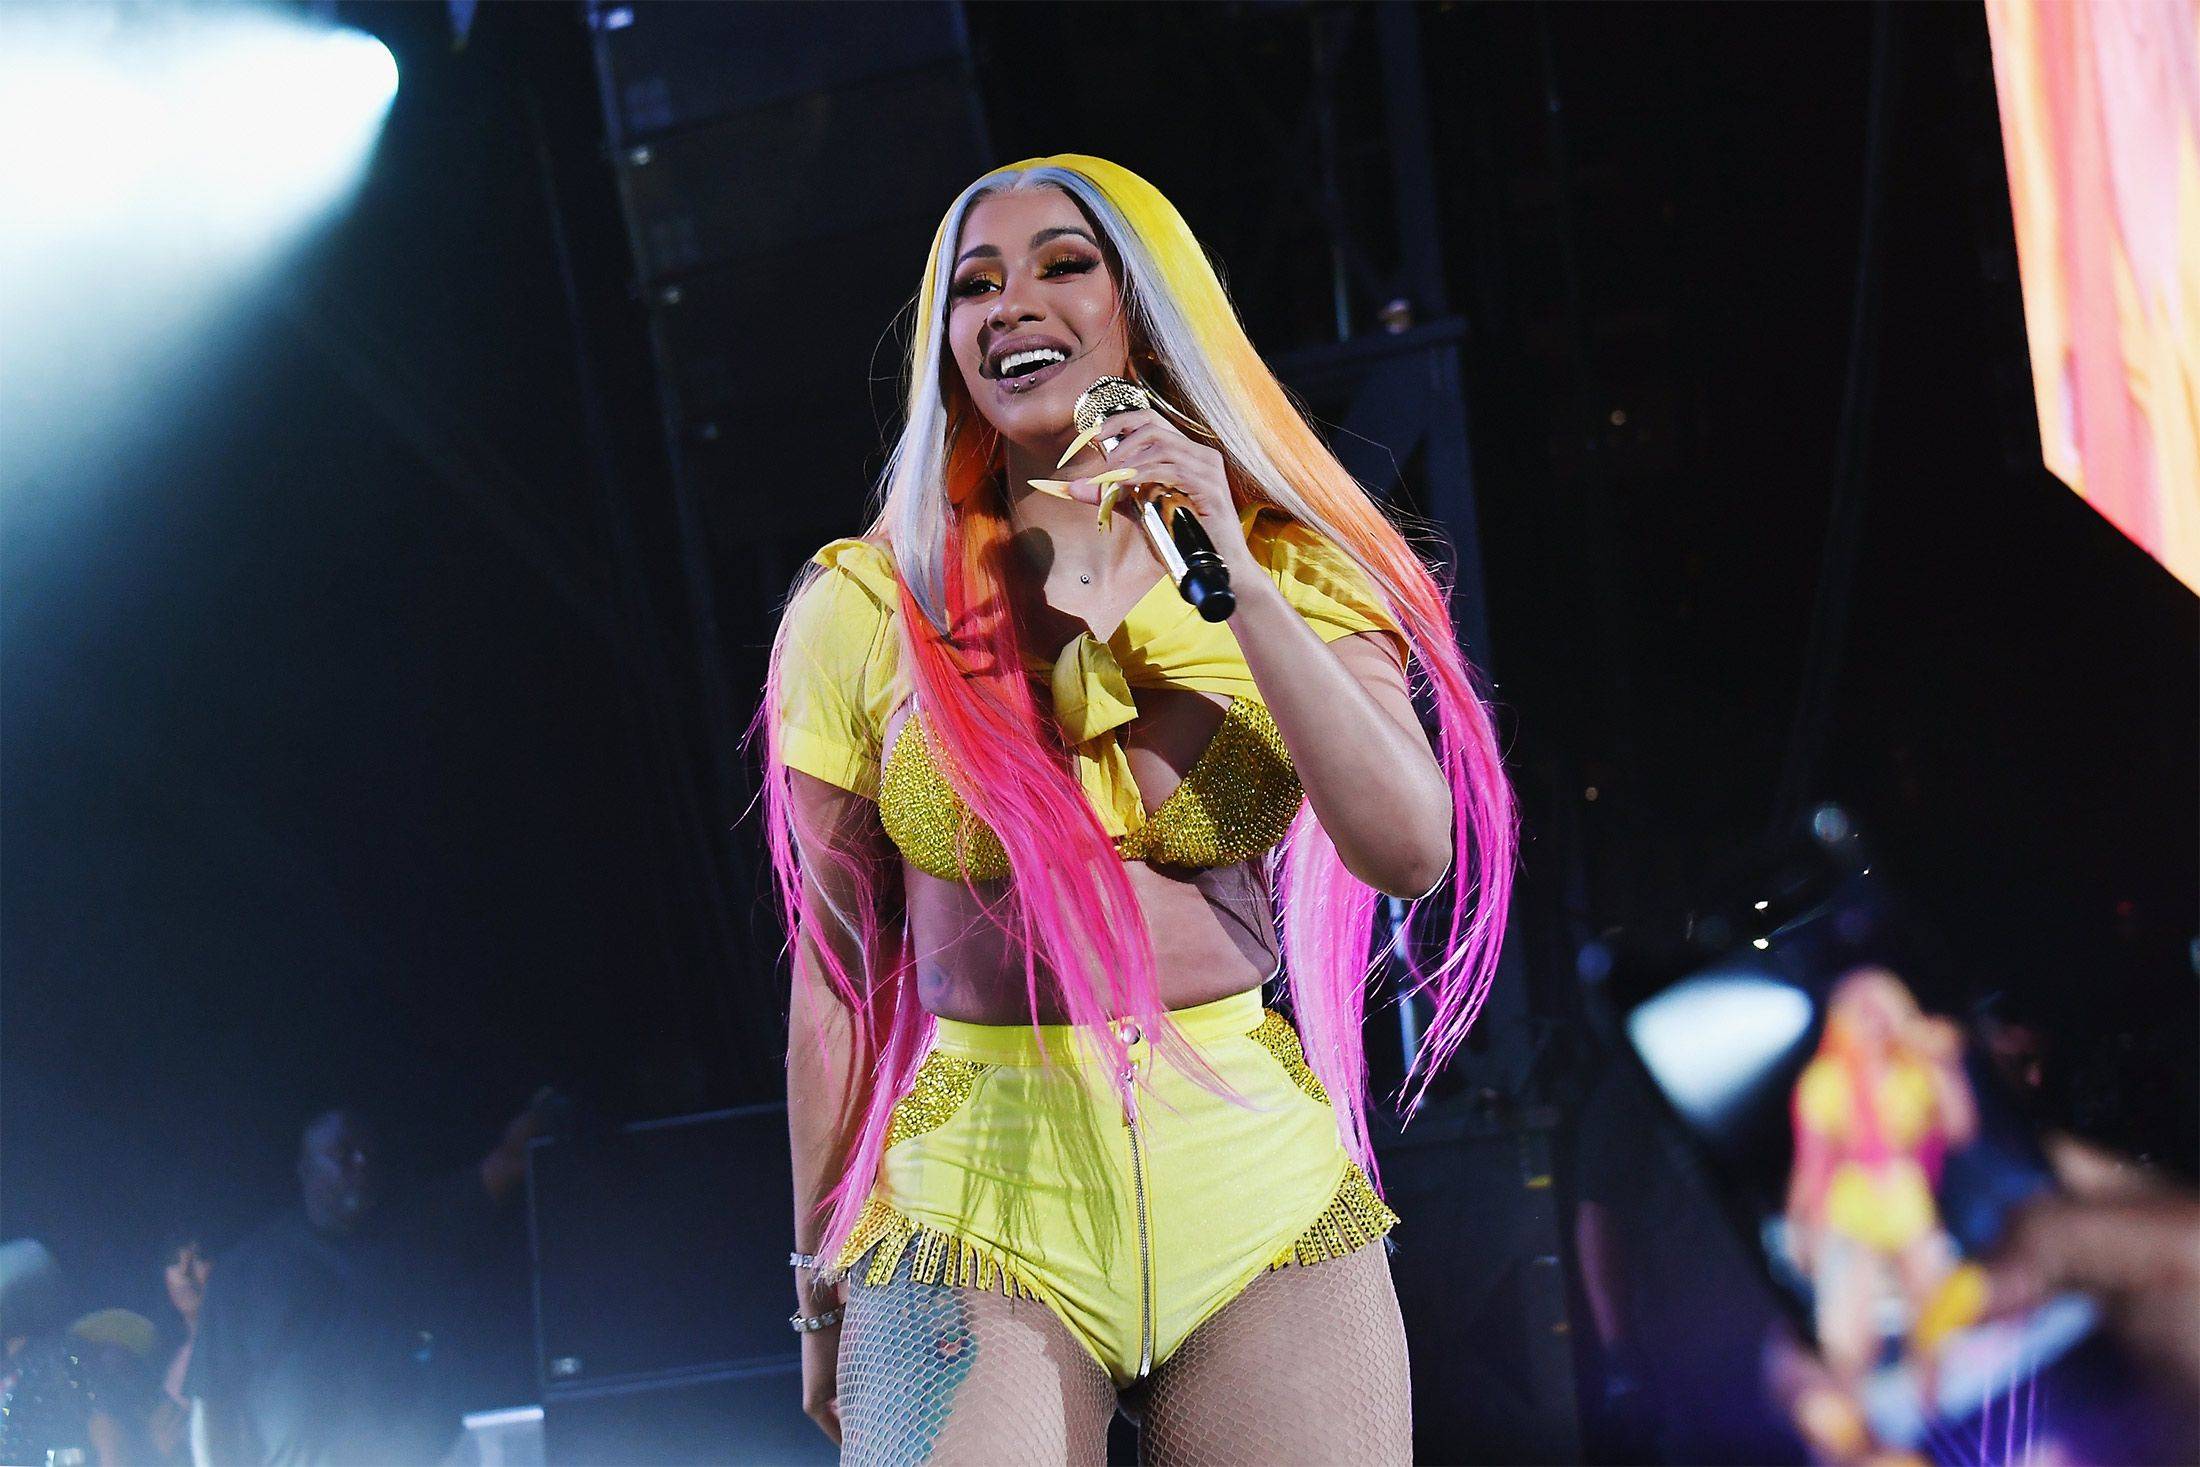 Cardi B is among the celebrities using OnlyFans, a site where people charge admirers for special access to videos and photos. | GETTY IMAGES / VIA BLOOMBERG 